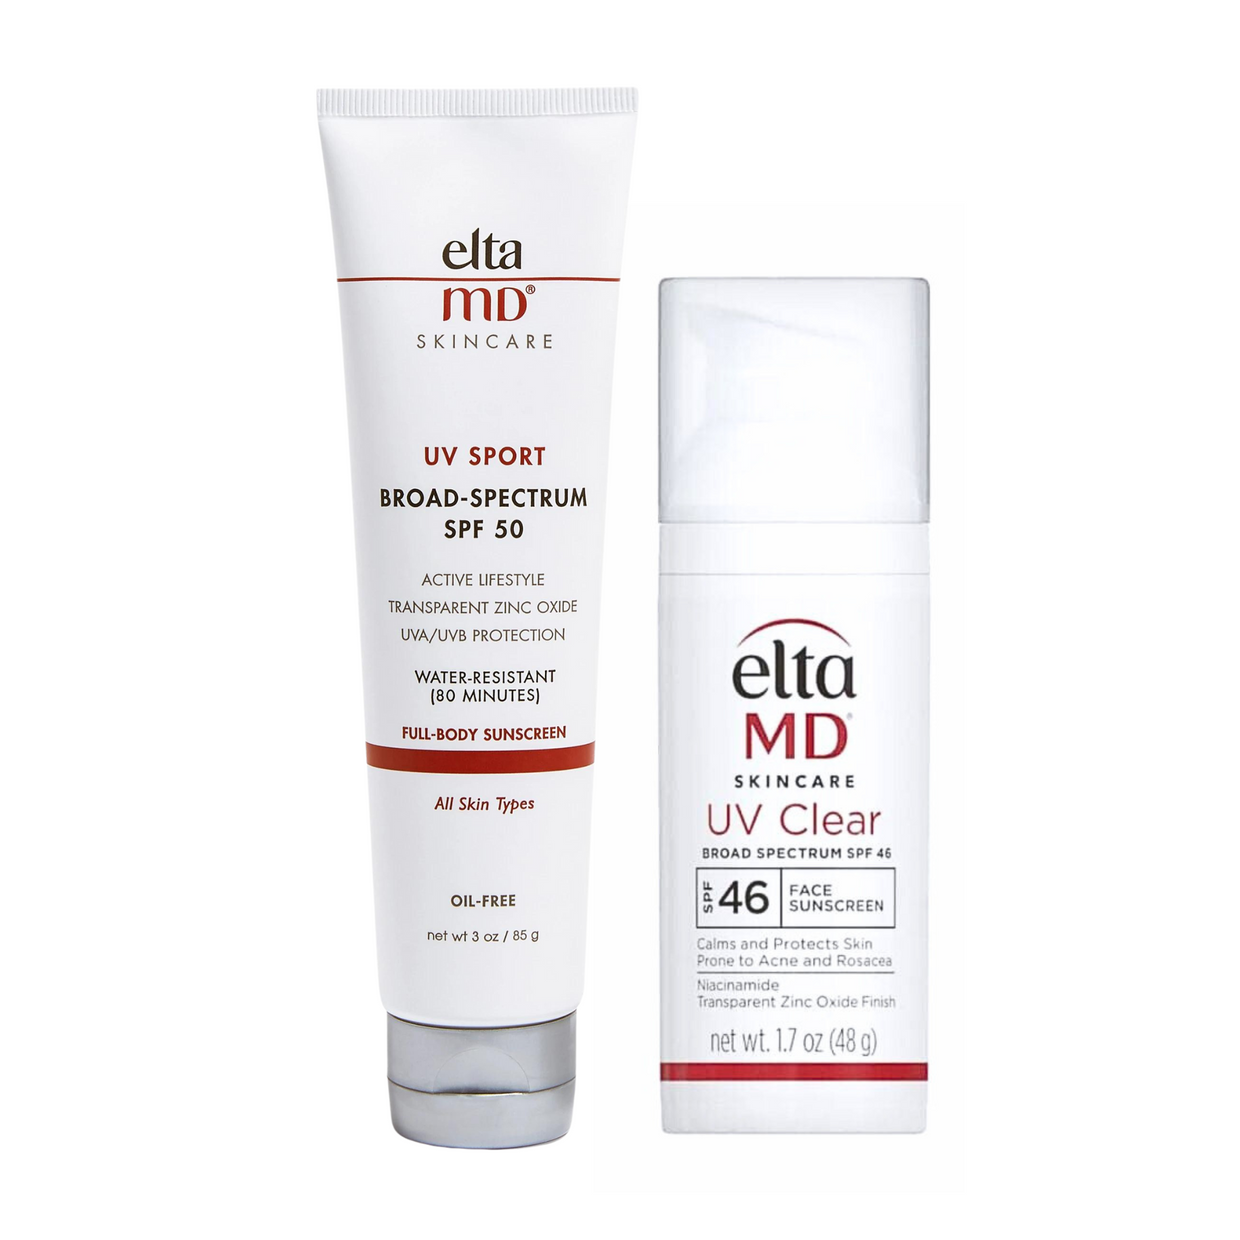 EltaMD Face and Body DUO - UV Clear Untinted SPF 46 + UV Sport SPF 50 ($71 Value) EltaMD Shop at Exclusive Beauty Club